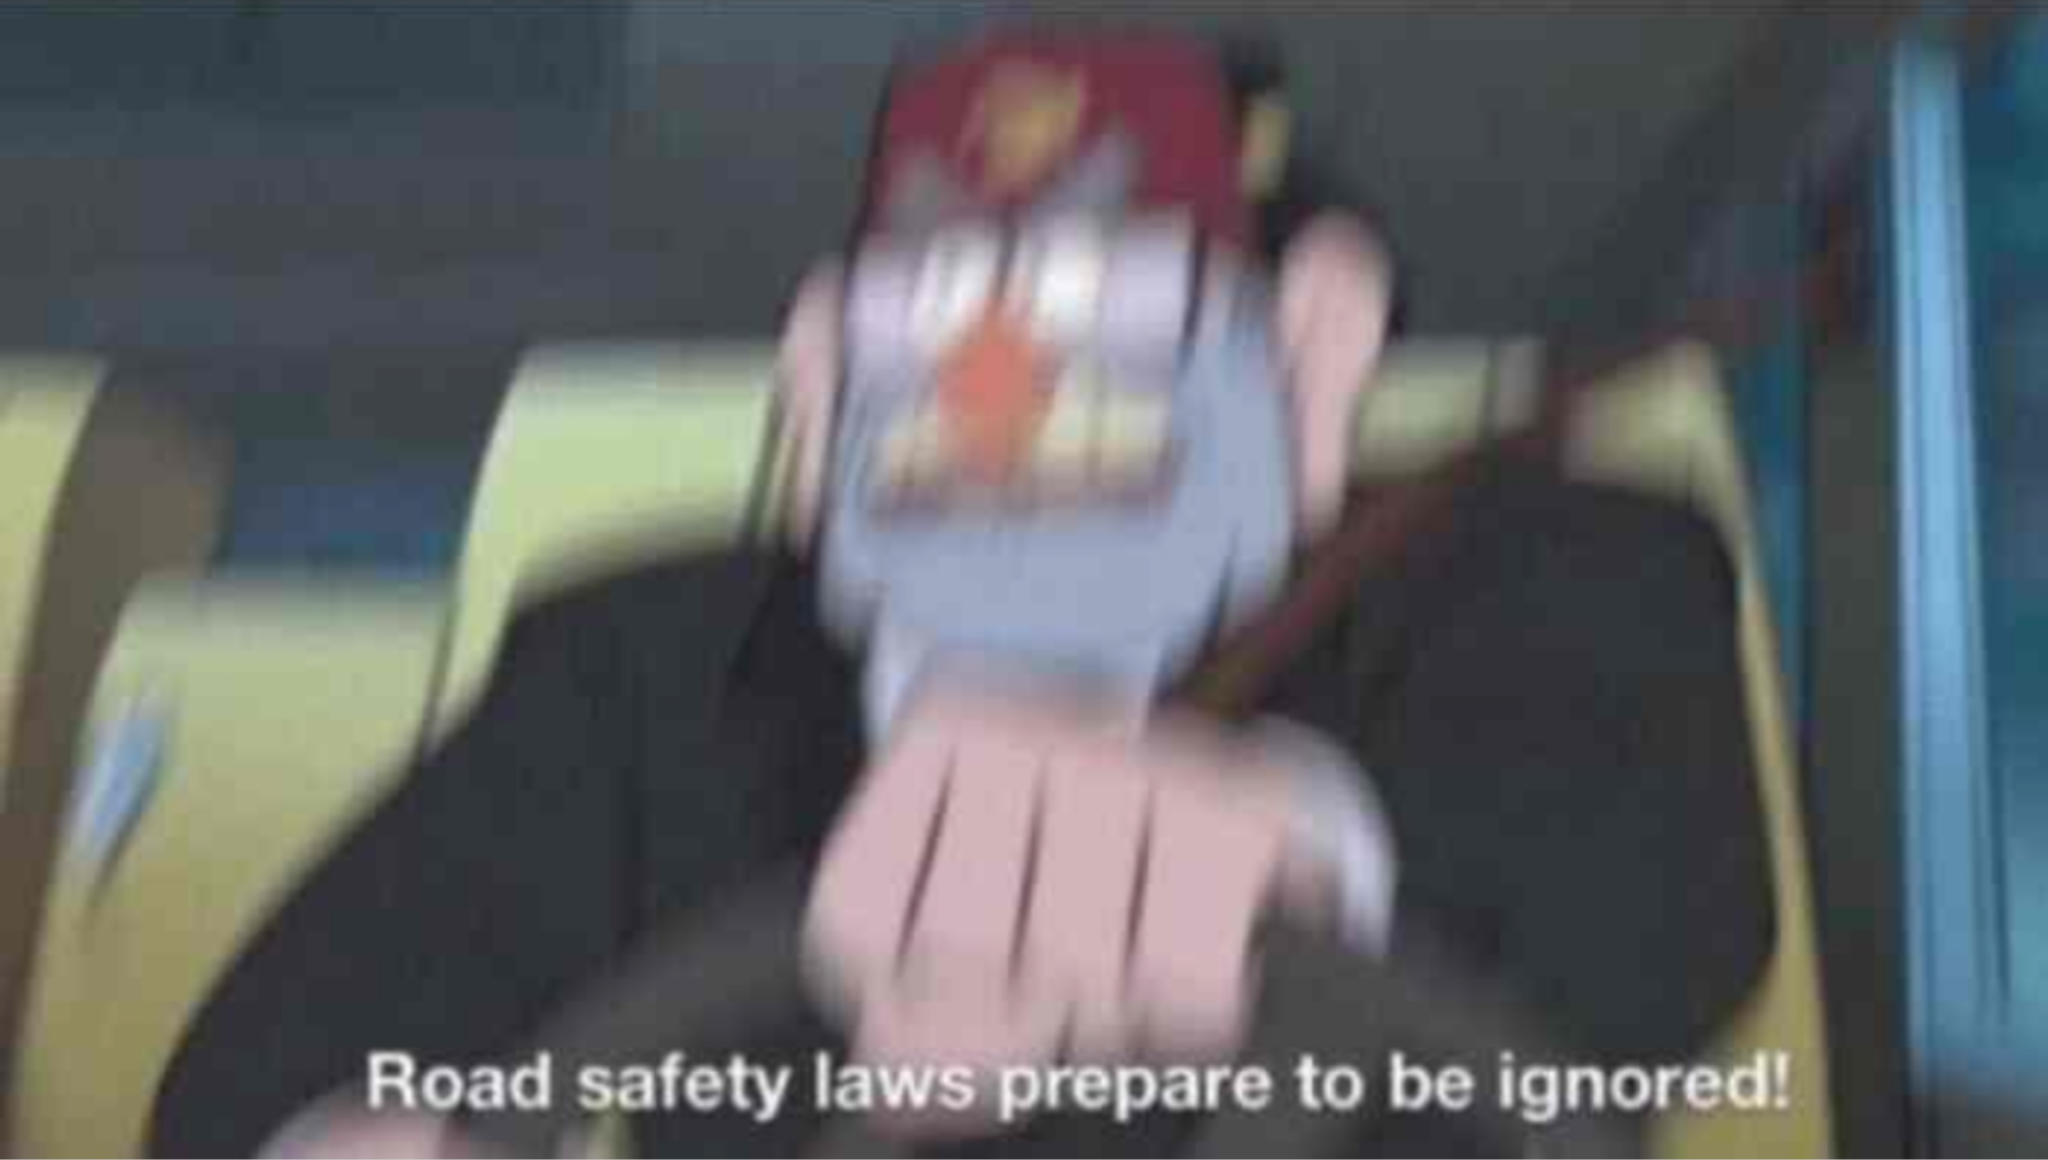 Road safety laws prepare to be ignored! Blank Meme Template